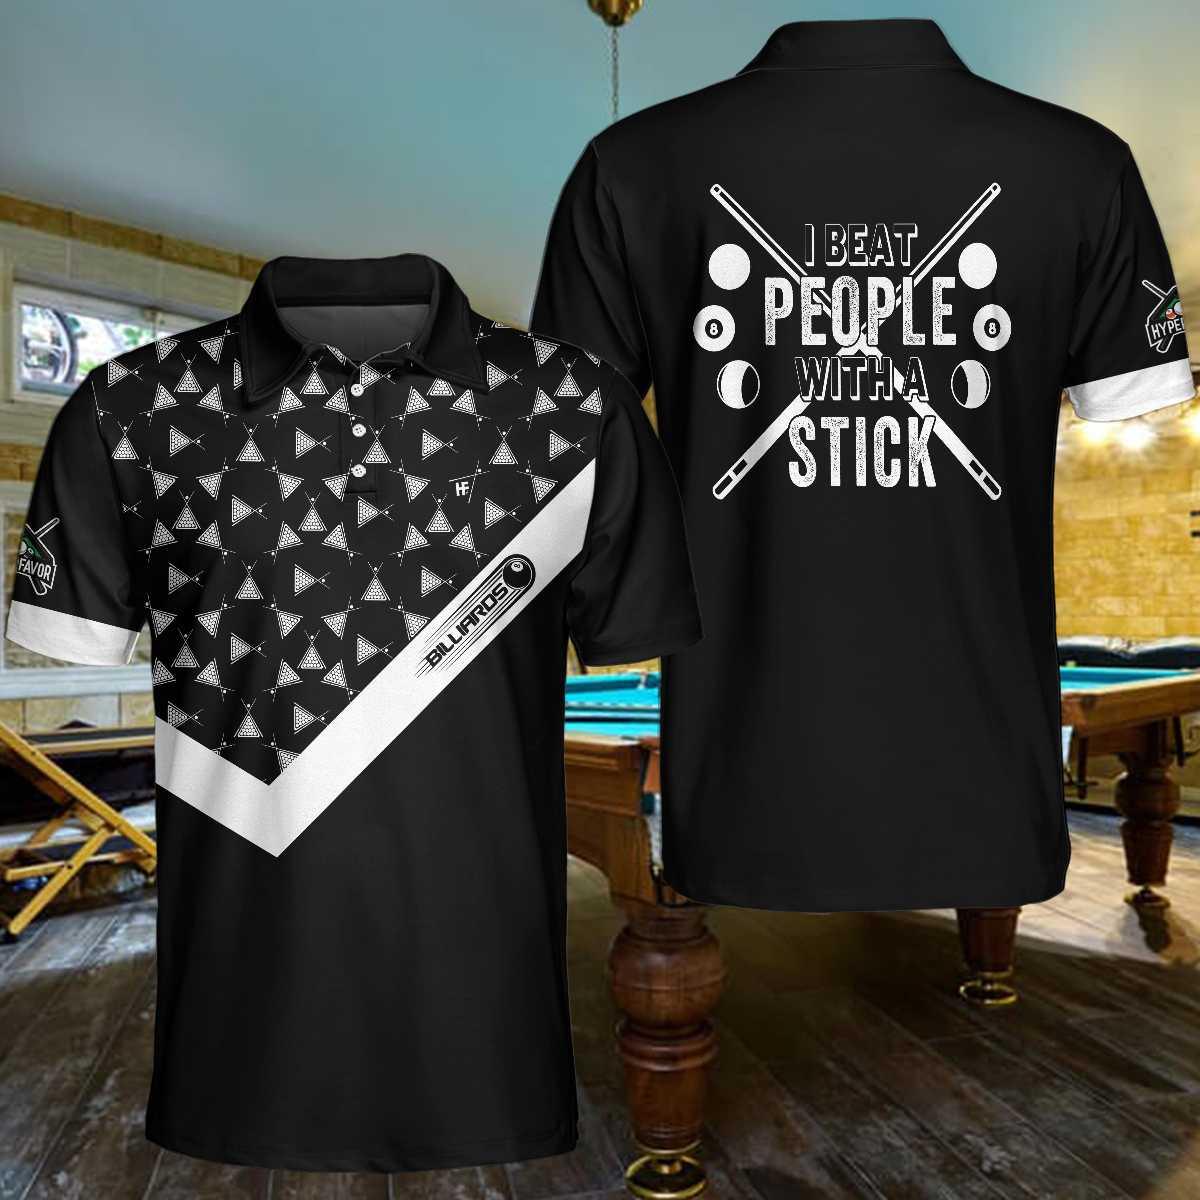 Billiards Men Polo Shirt, Ball And Sticks Set, I Beat People With A Stick Polo Shirt, Best Billiards Shirt For Men, Gift For Billiards Lovers - Amzanimalsgift